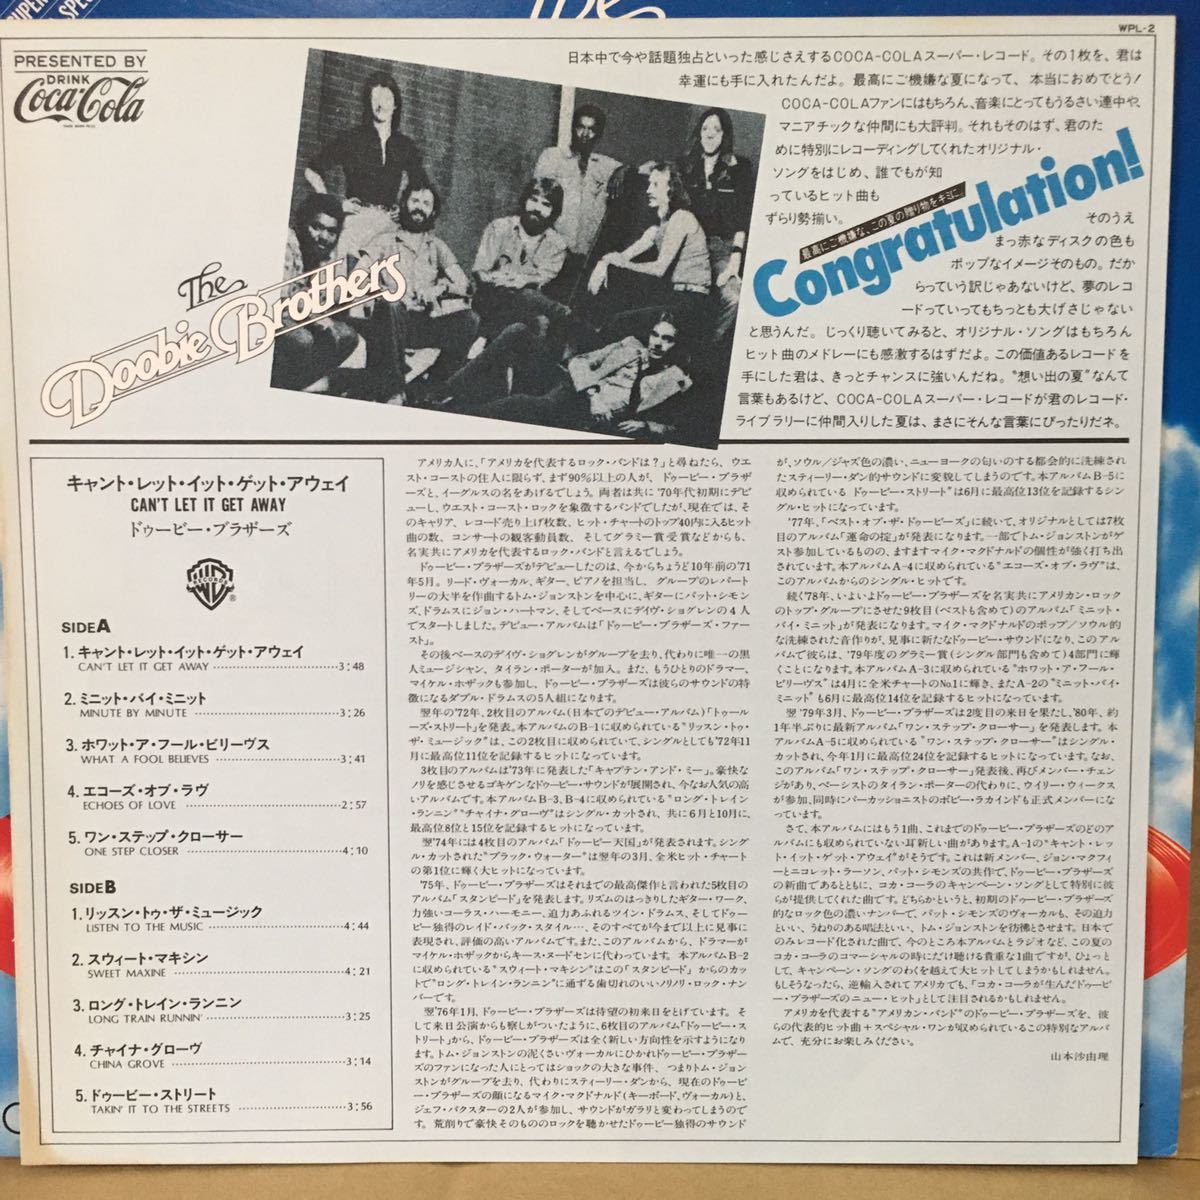 【LP】 THE DOOBIE BROTHERS / コカコーラ ピクチャー盤　※ LONG TRAIN RUNNIN　/ WHAT A FOOL BELIEVES 収録_画像4